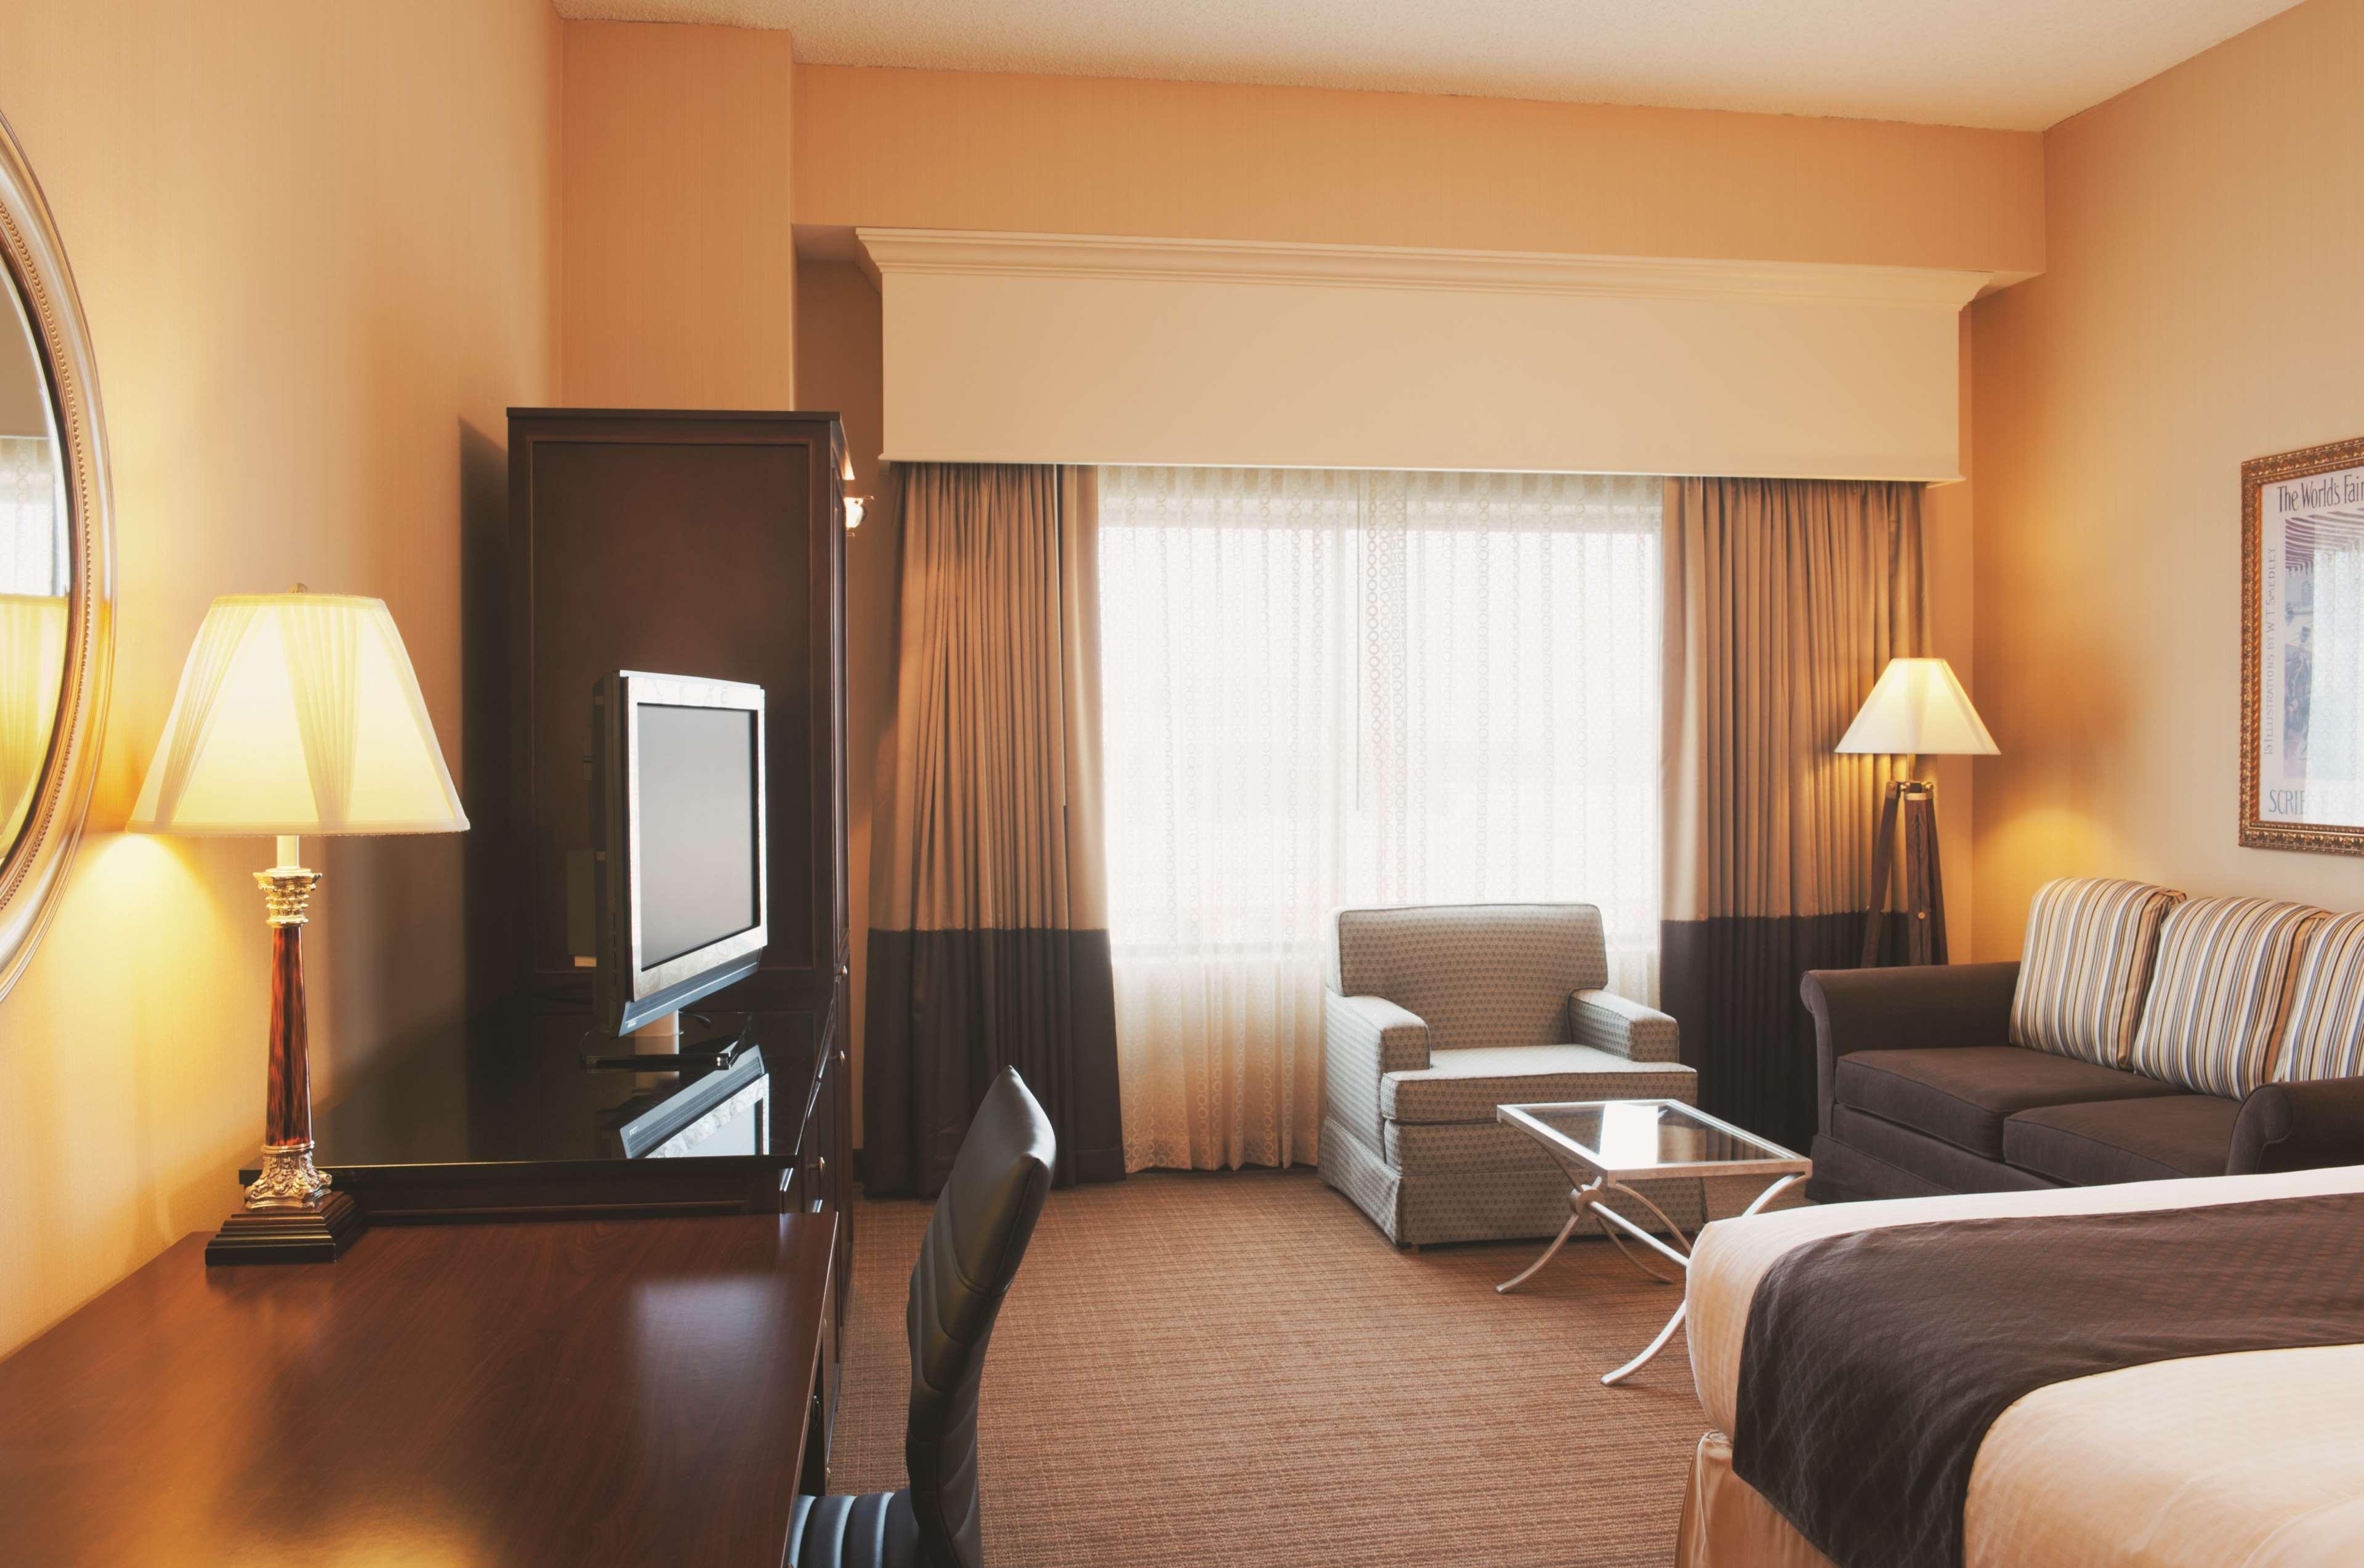 Doubletree By Hilton Chicago O'Hare Airport-Rosemont Hotel Bilik gambar